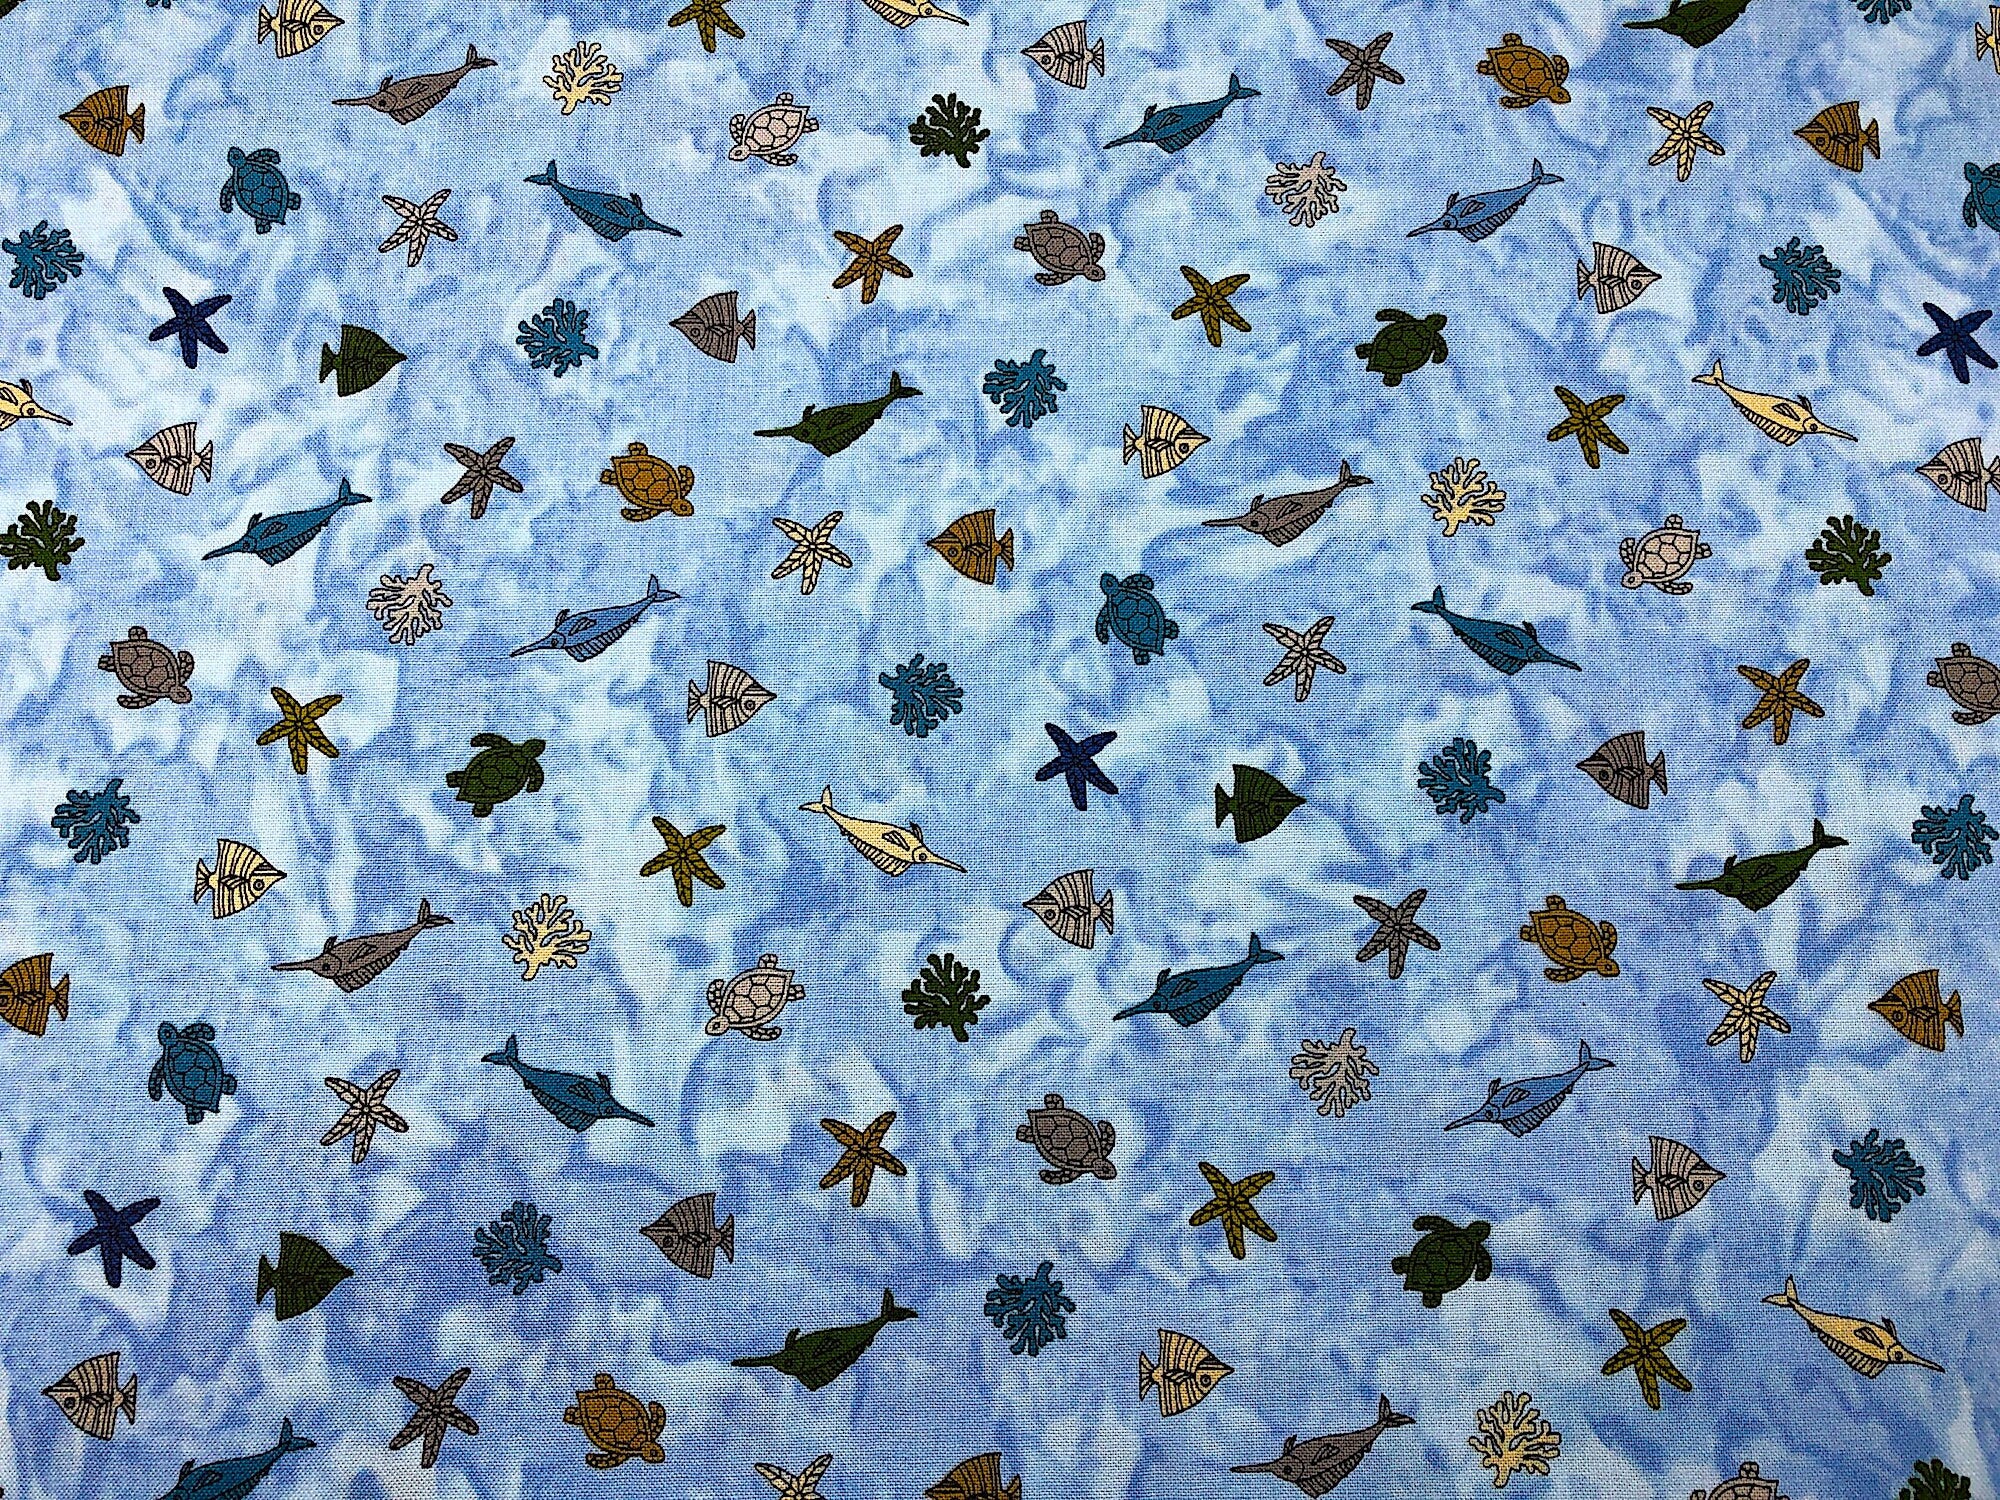 Close up of fish, starfish on a blue and white background.